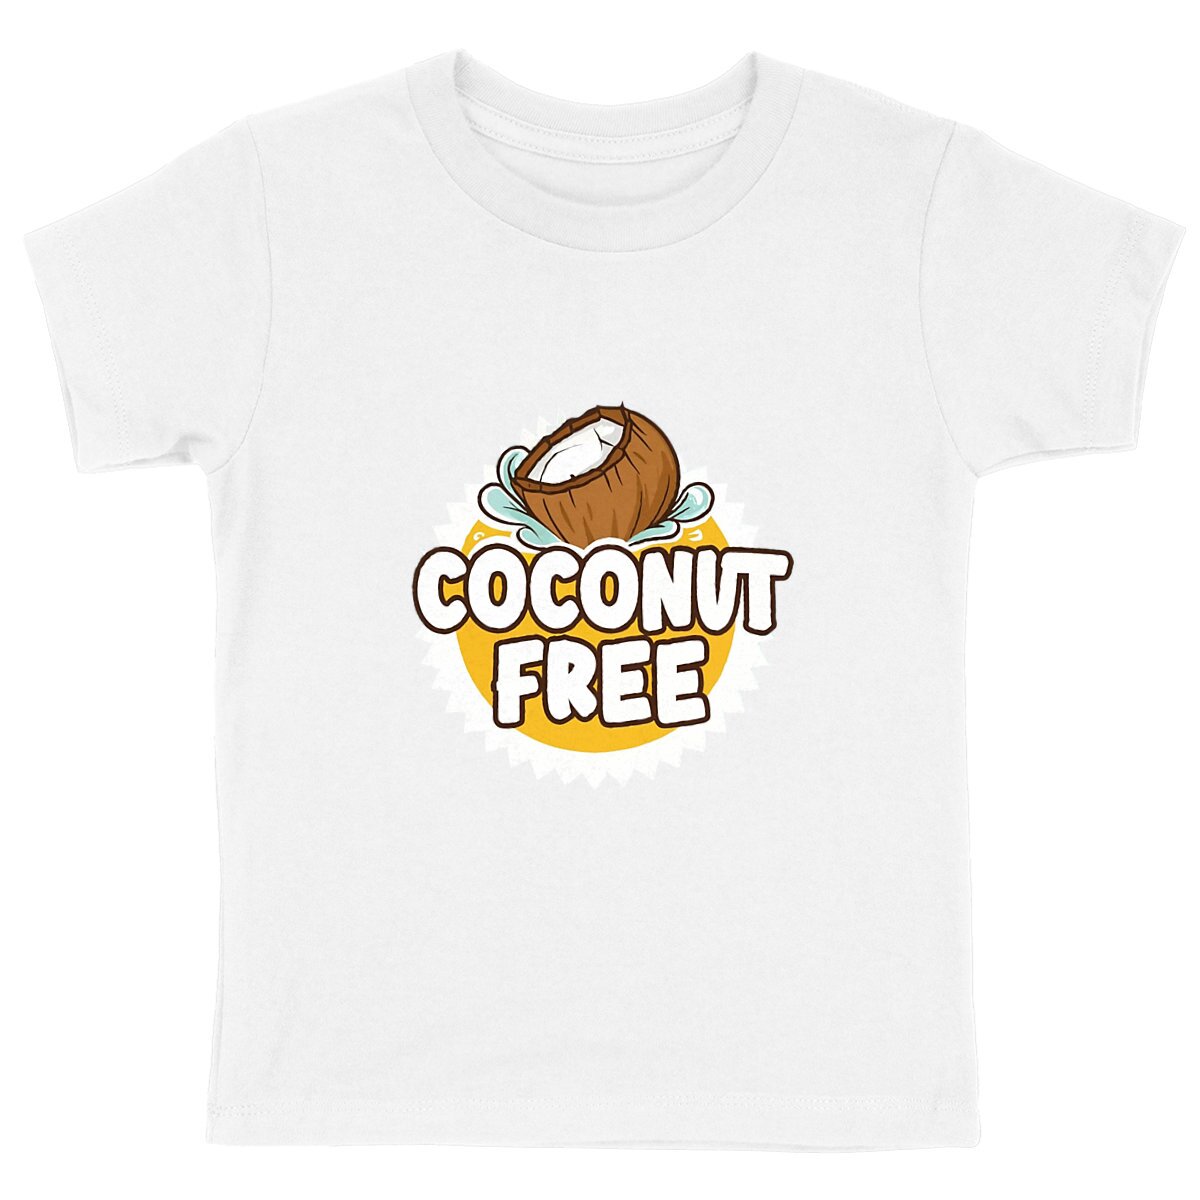 Coconut Free Organic Cotton Graphic Kid's Shirt | Hypoallergenic - Allergy Friendly - Naturally Free